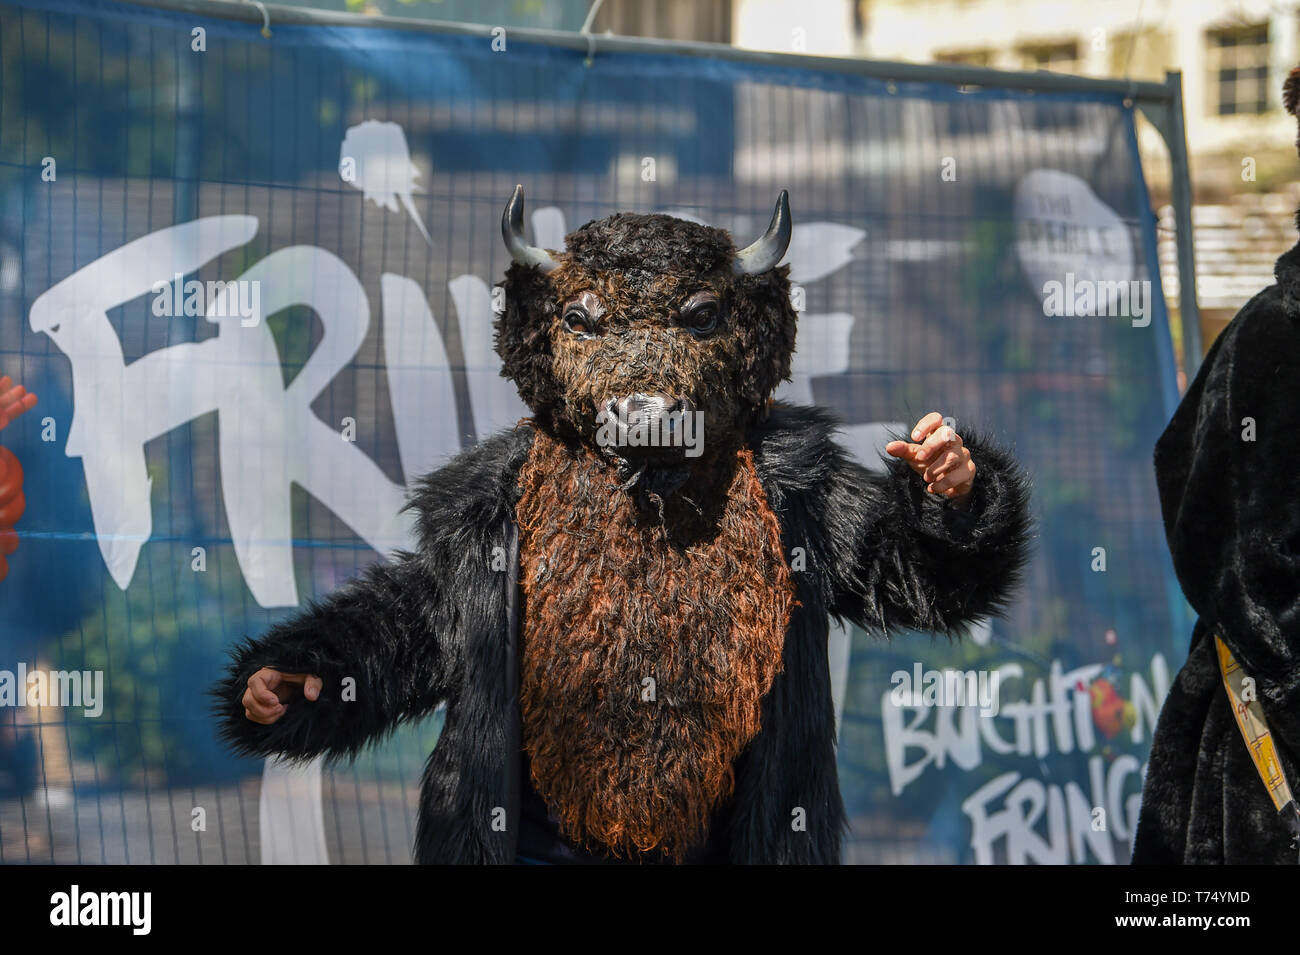 Brighton UK 4th May 2019 - Performers at the Brighton Festival Fringe 'Streets of Brighton' event in the city centre on the opening day. Credit: Simon Dack / Alamy Live News Stock Photo